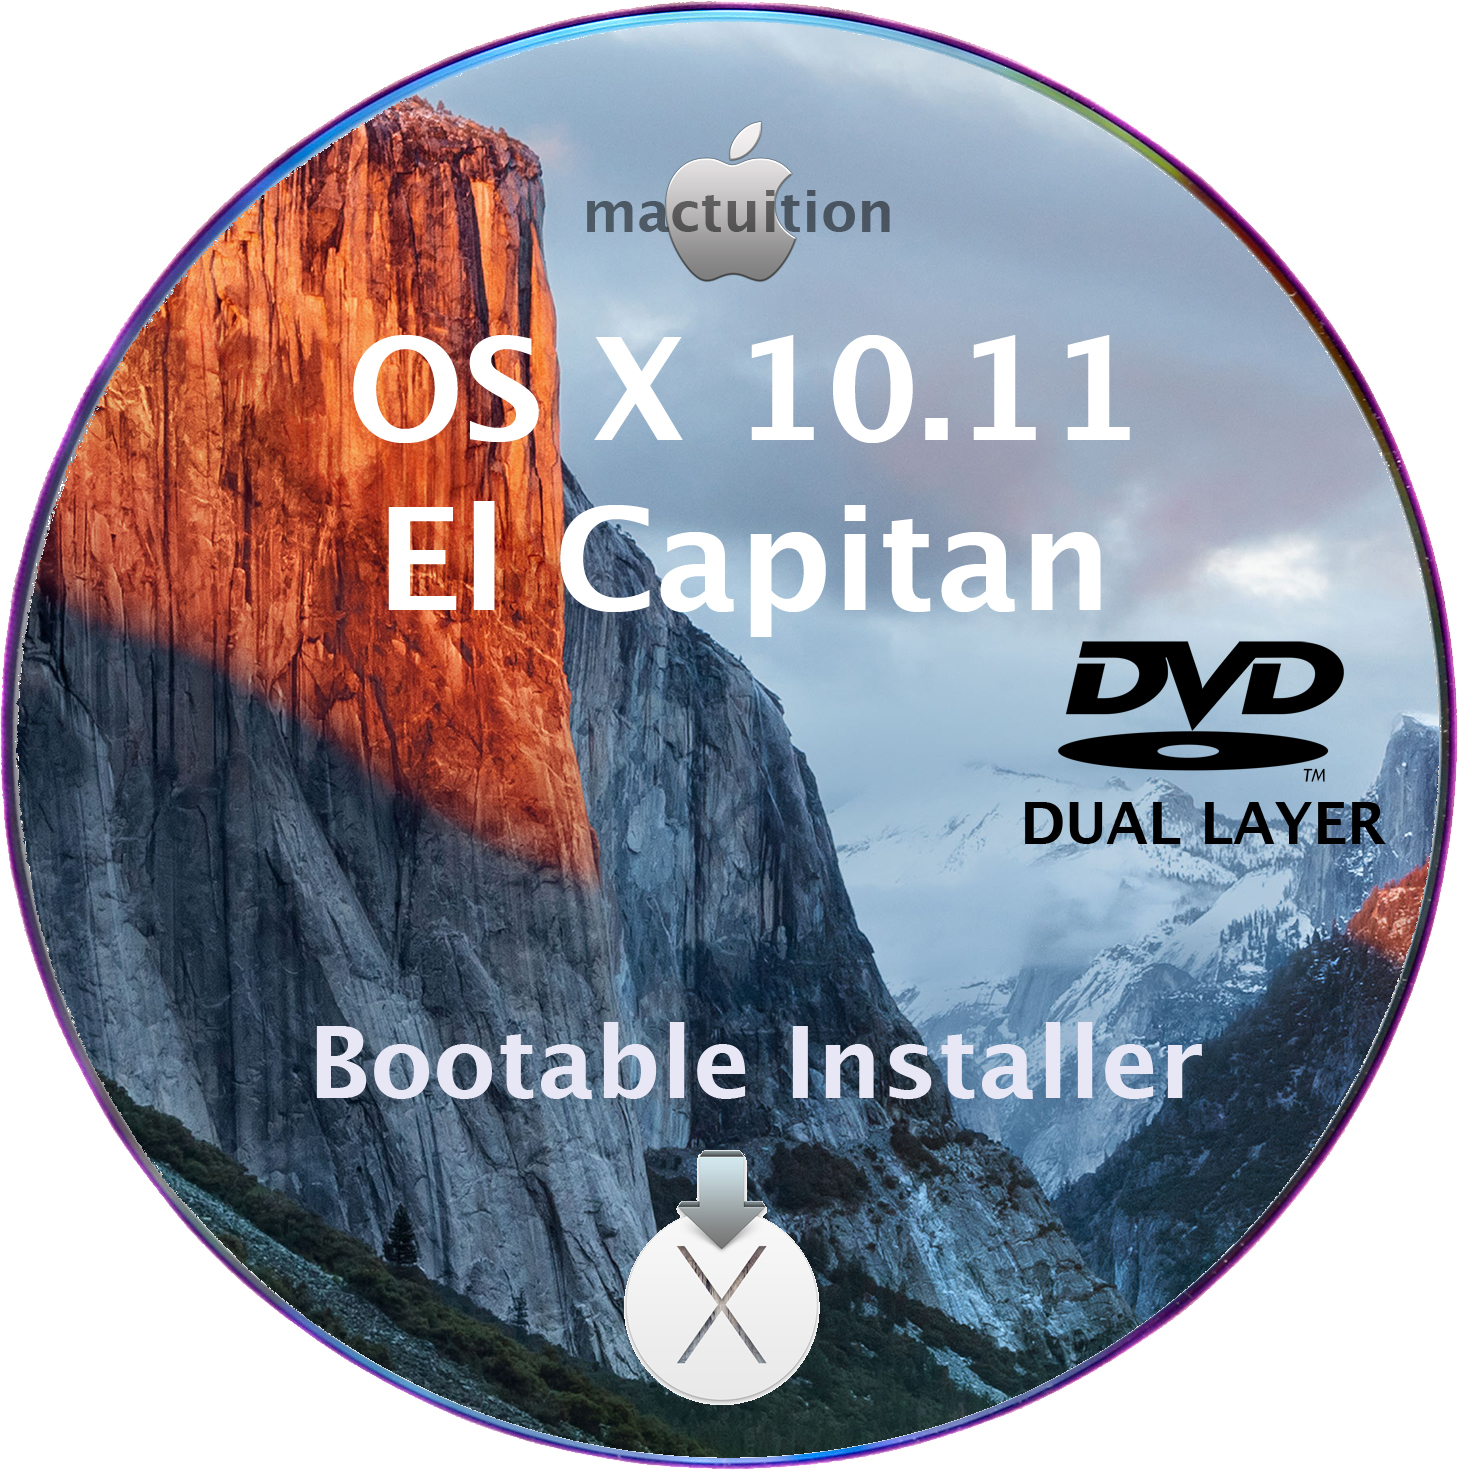 Os x version 10.13 for mac